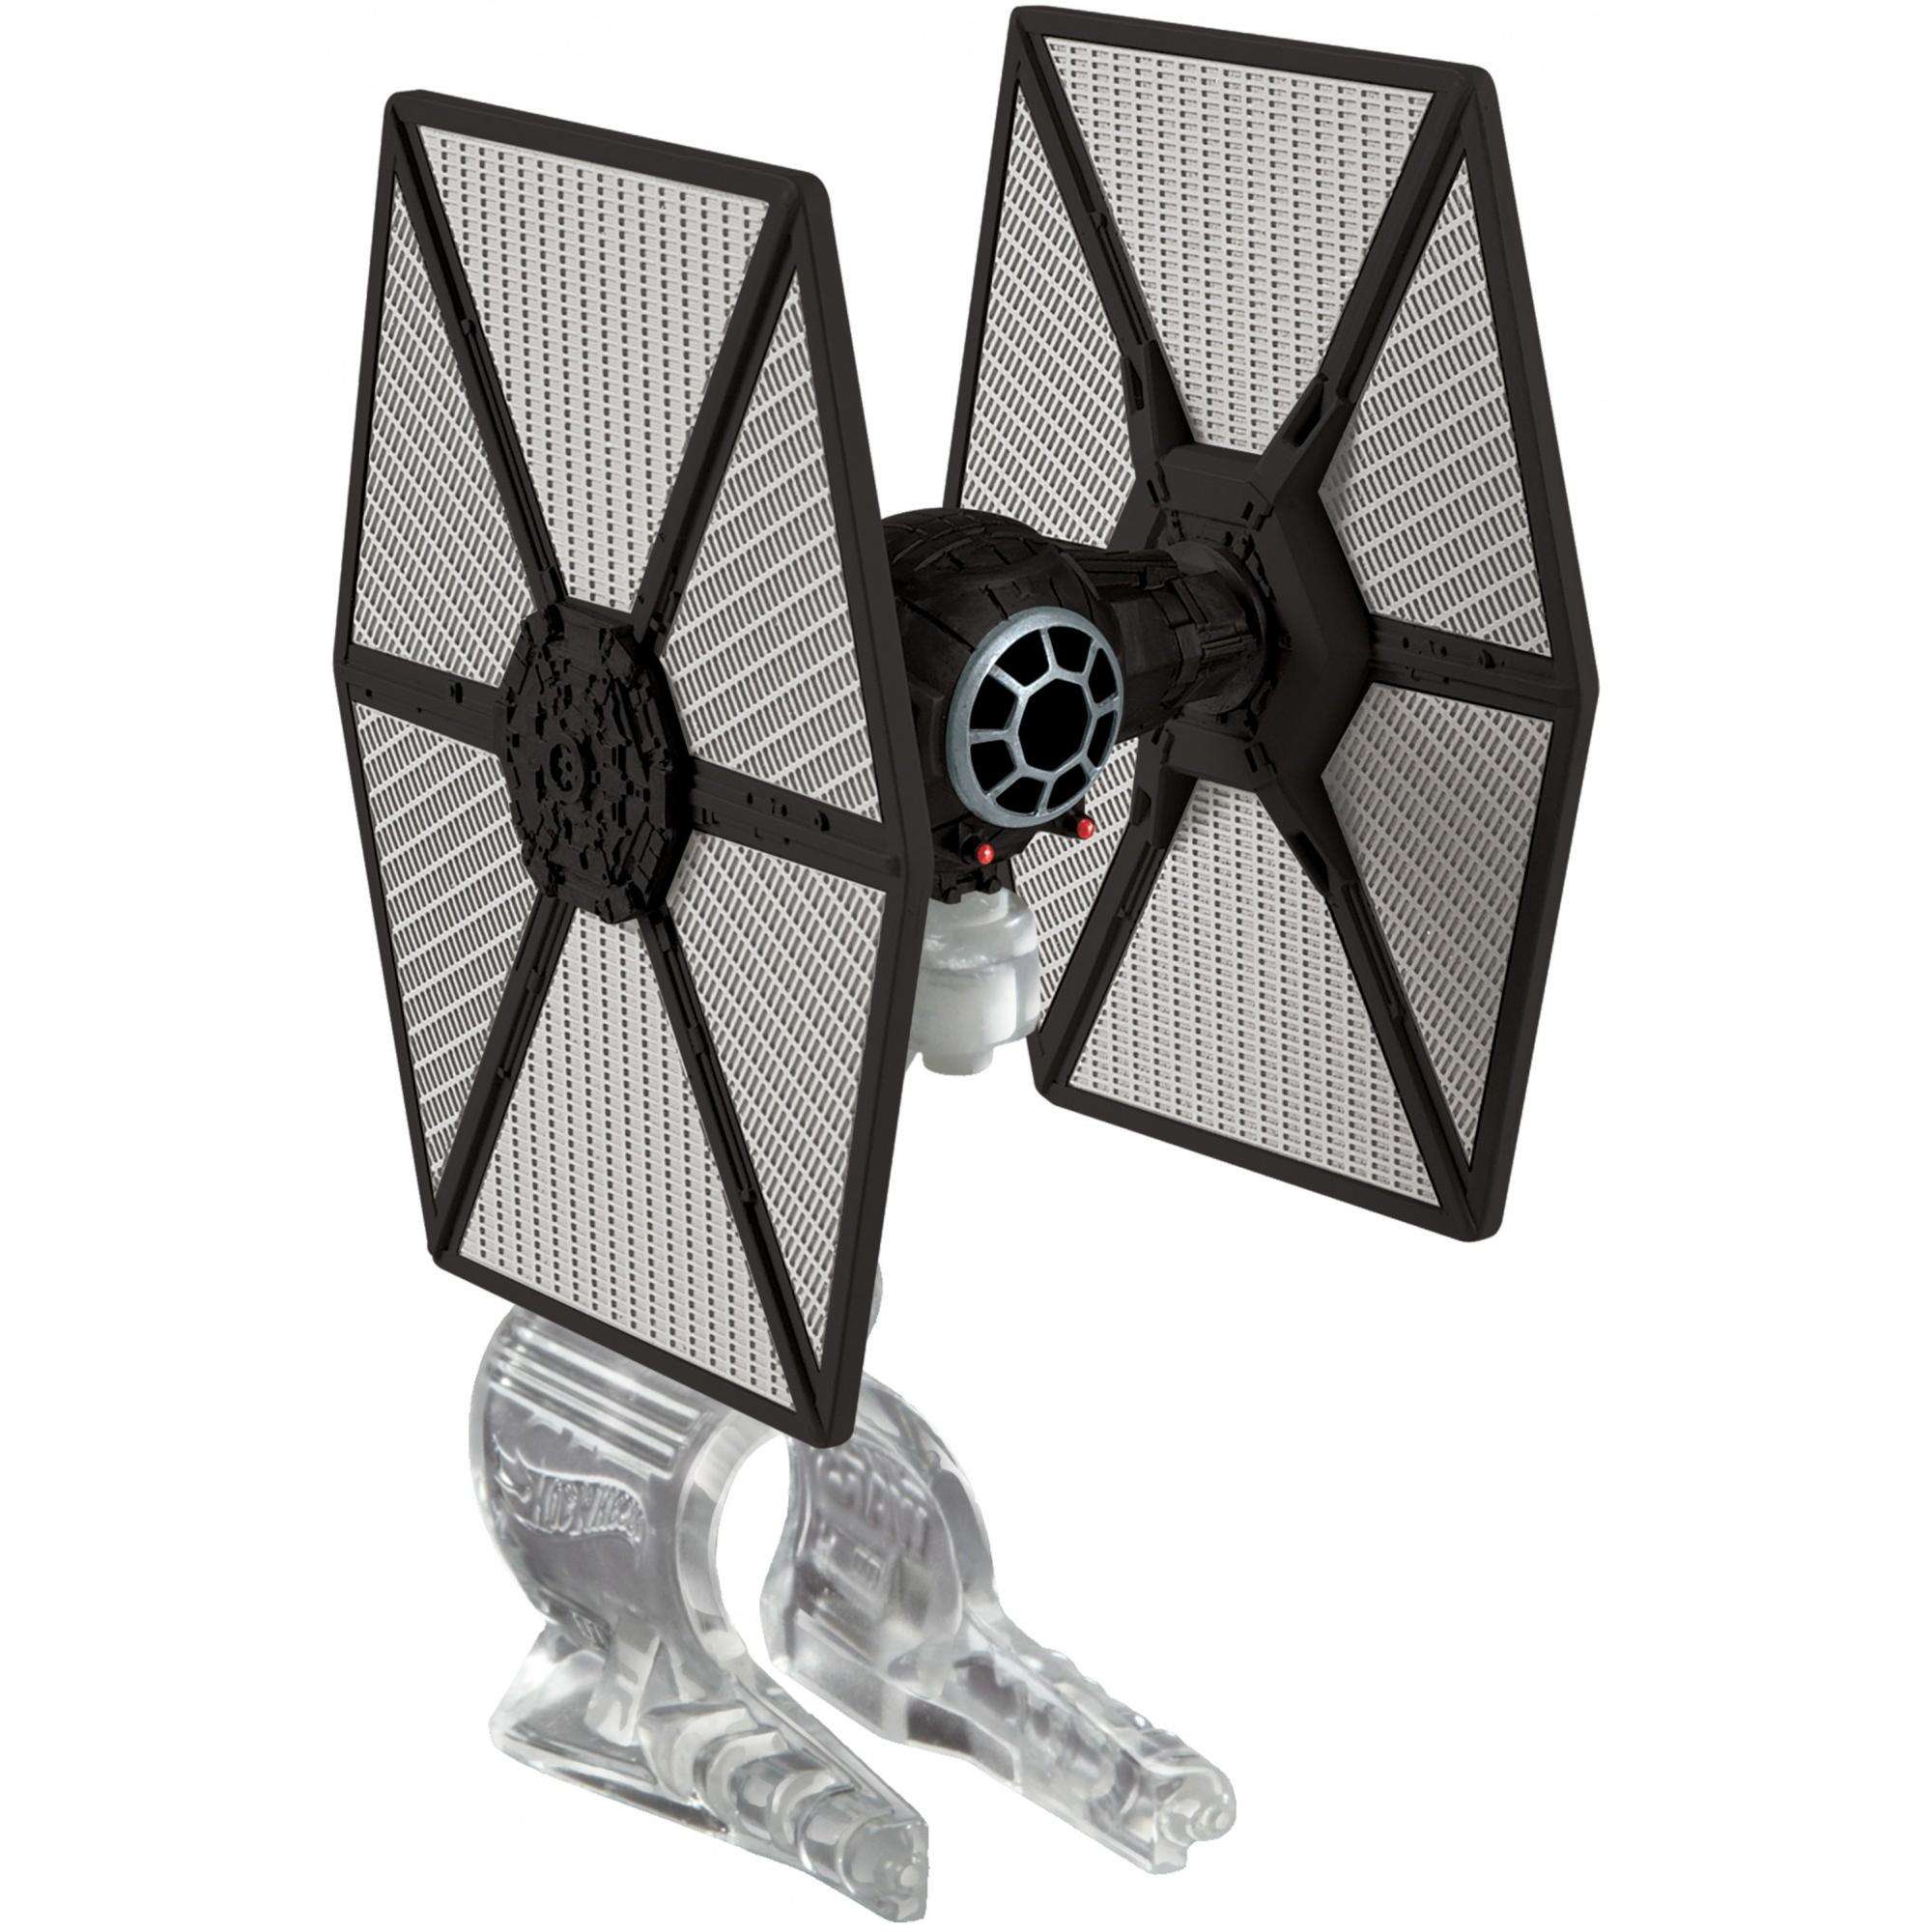 Hot Wheels Star Wars First Order Tie Fighter vs. Millennium Falcon - image 3 of 5